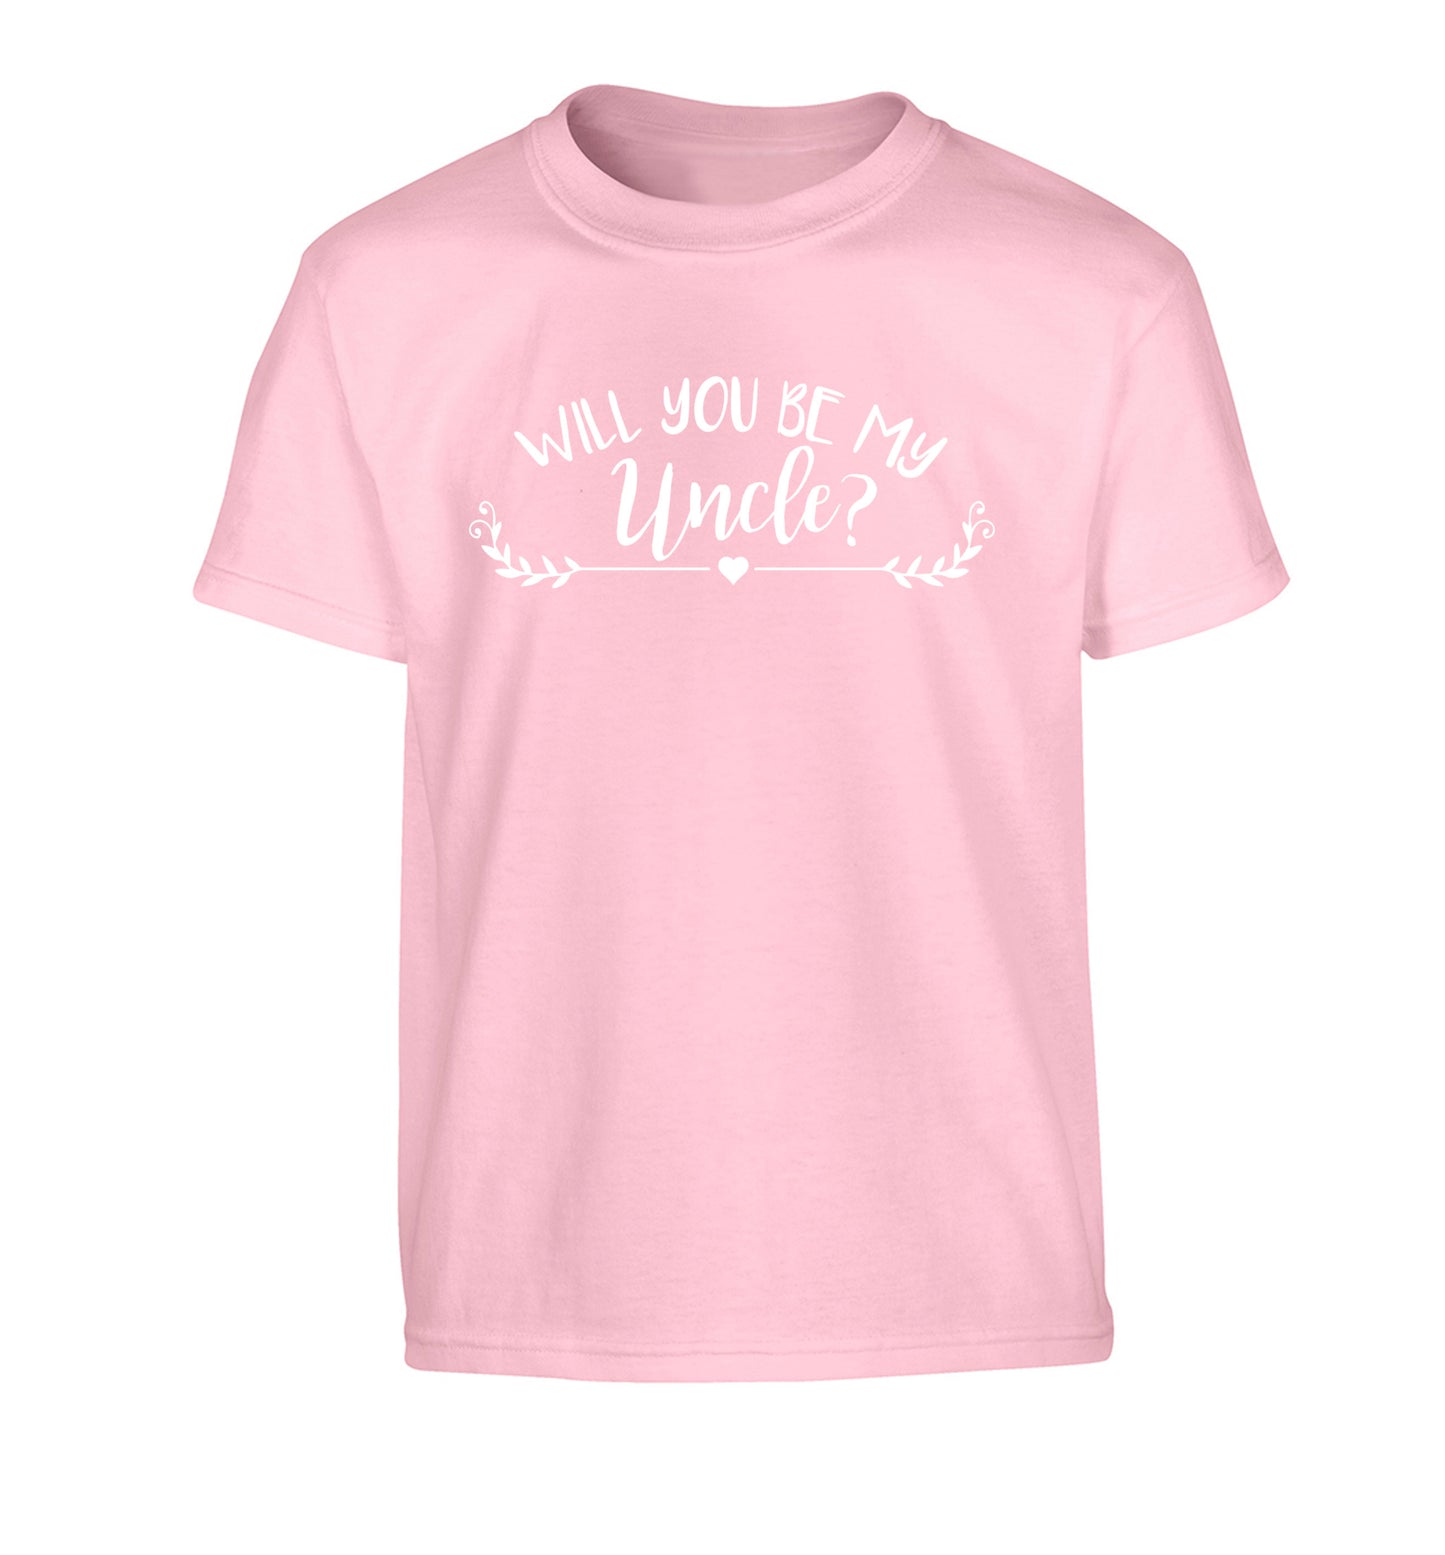 Will you be my uncle? Children's light pink Tshirt 12-14 Years